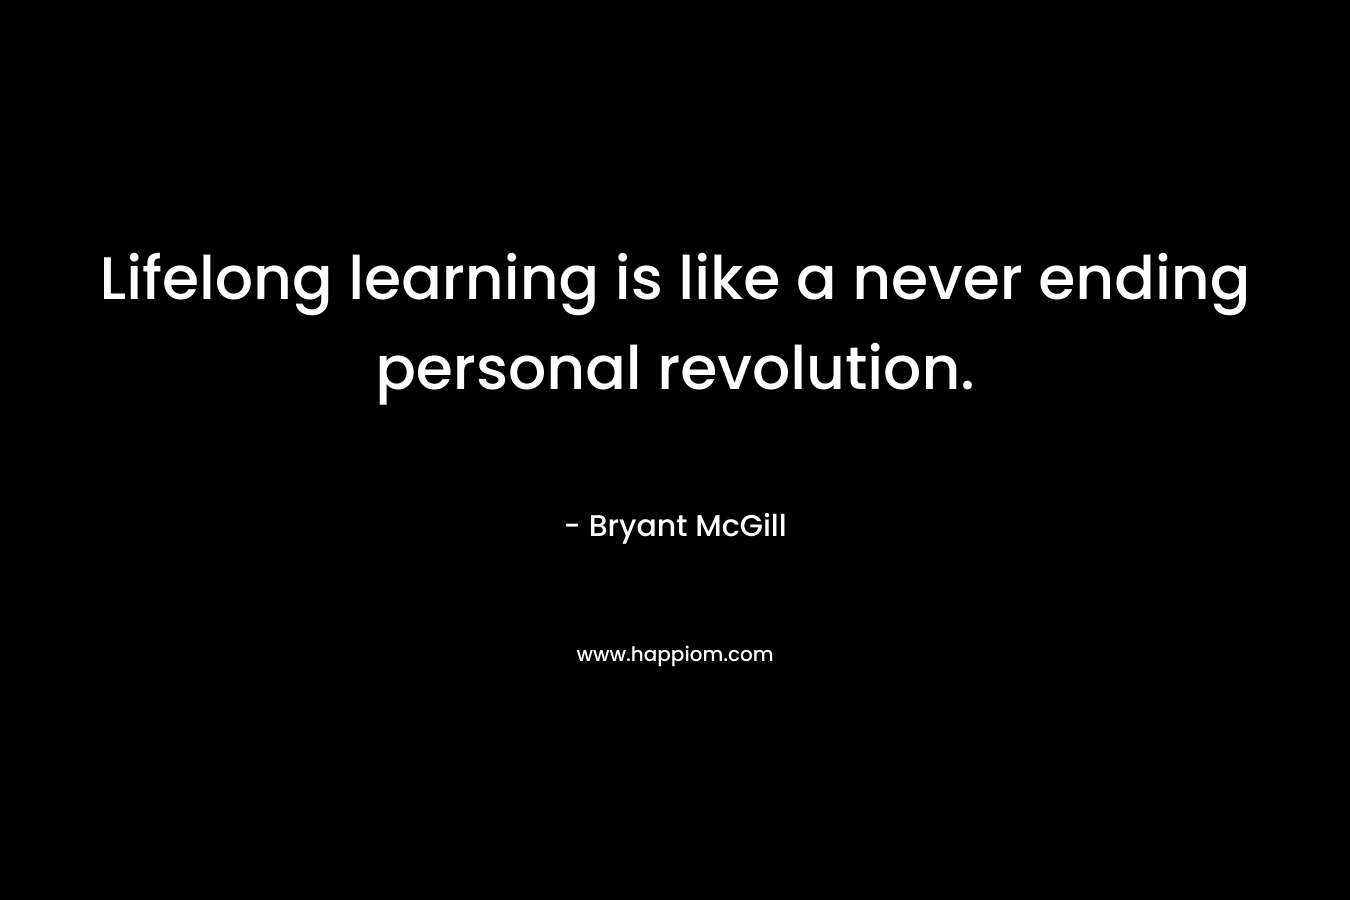 Lifelong learning is like a never ending personal revolution.